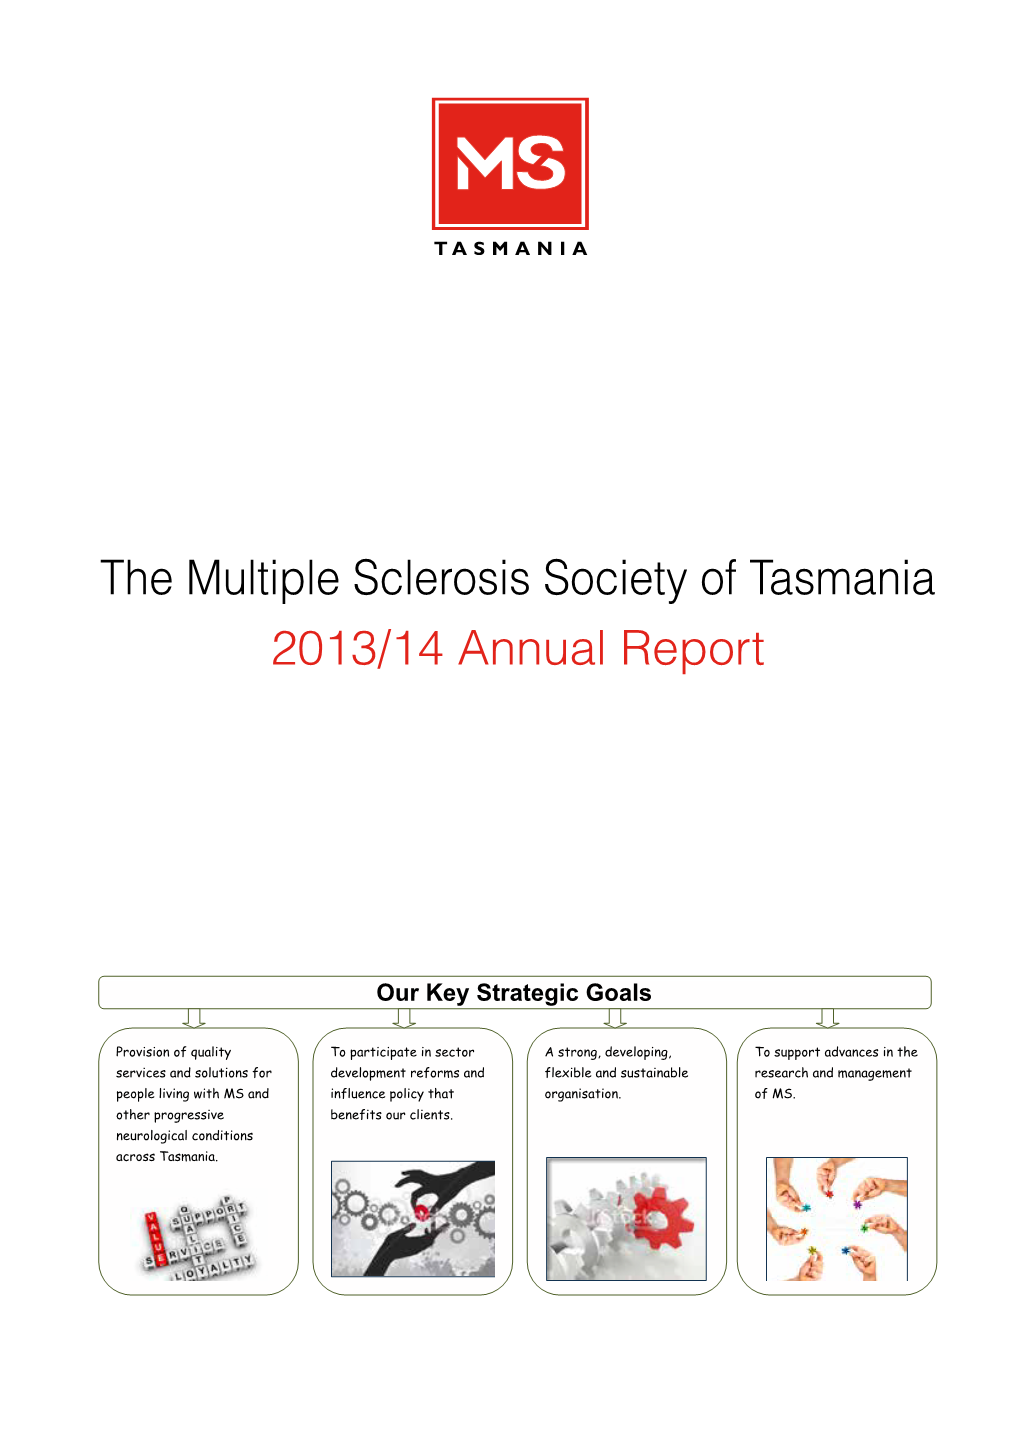 The Multiple Sclerosis Society of Tasmania 2013/14 Annual Report